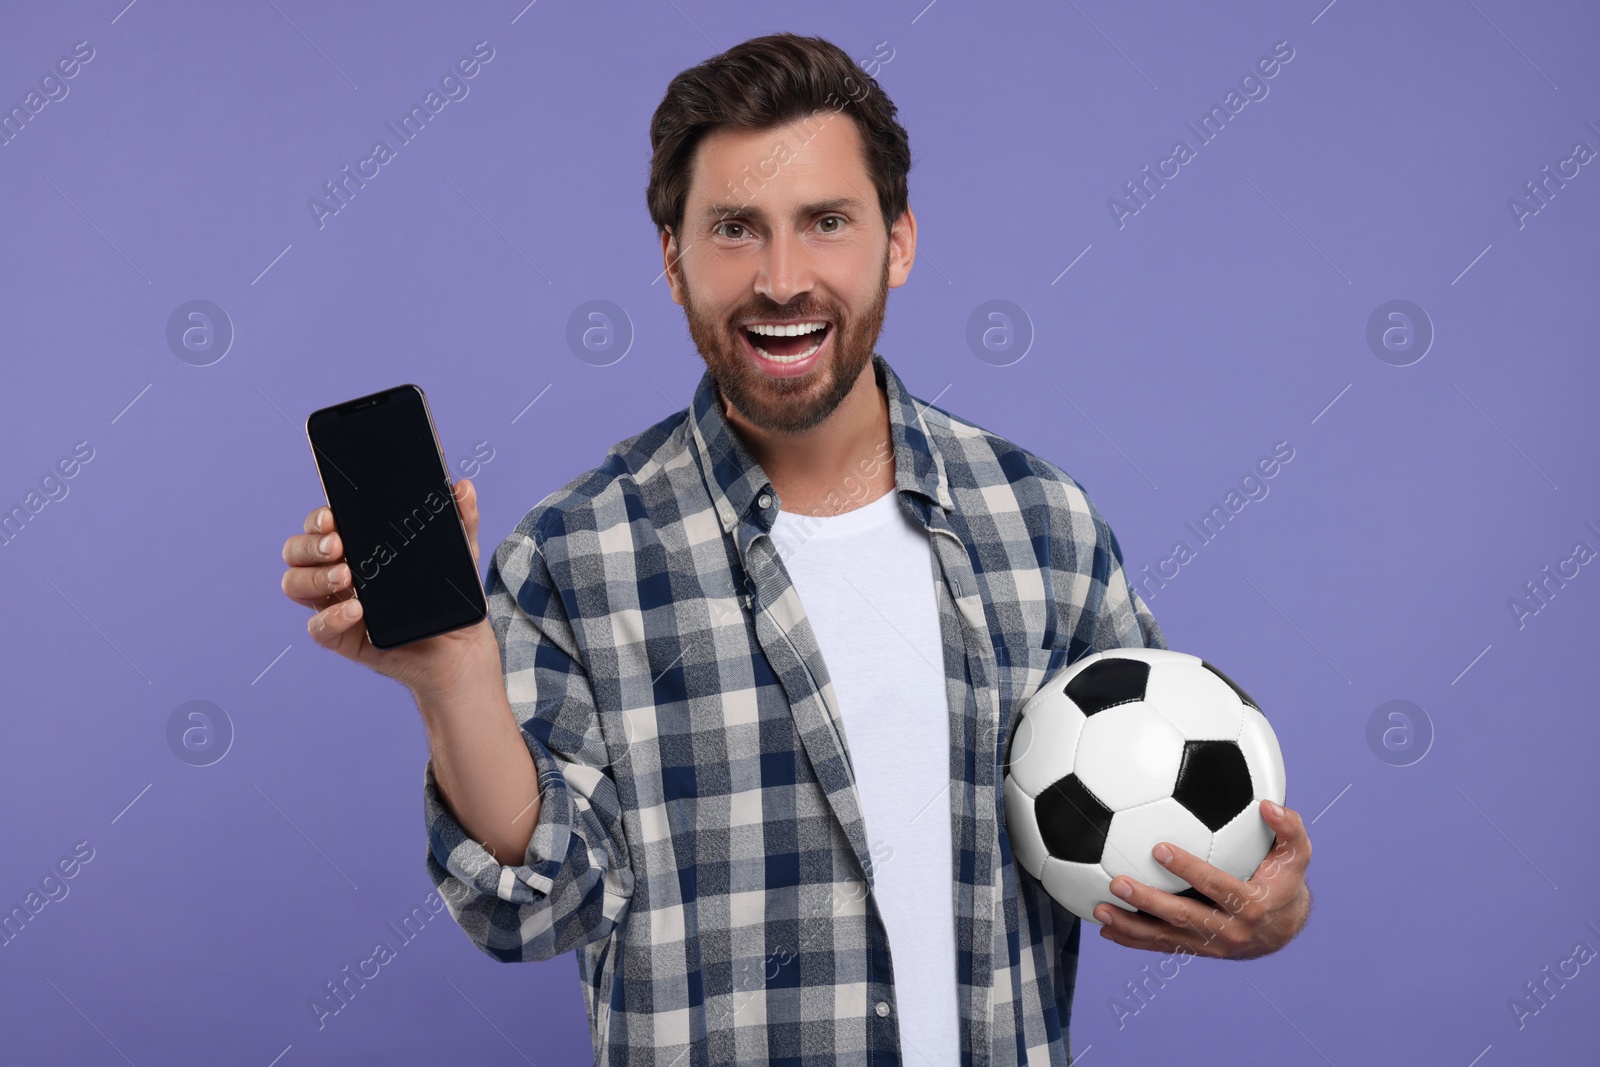 Photo of Happy sports fan with soccer ball and smartphone on purple background